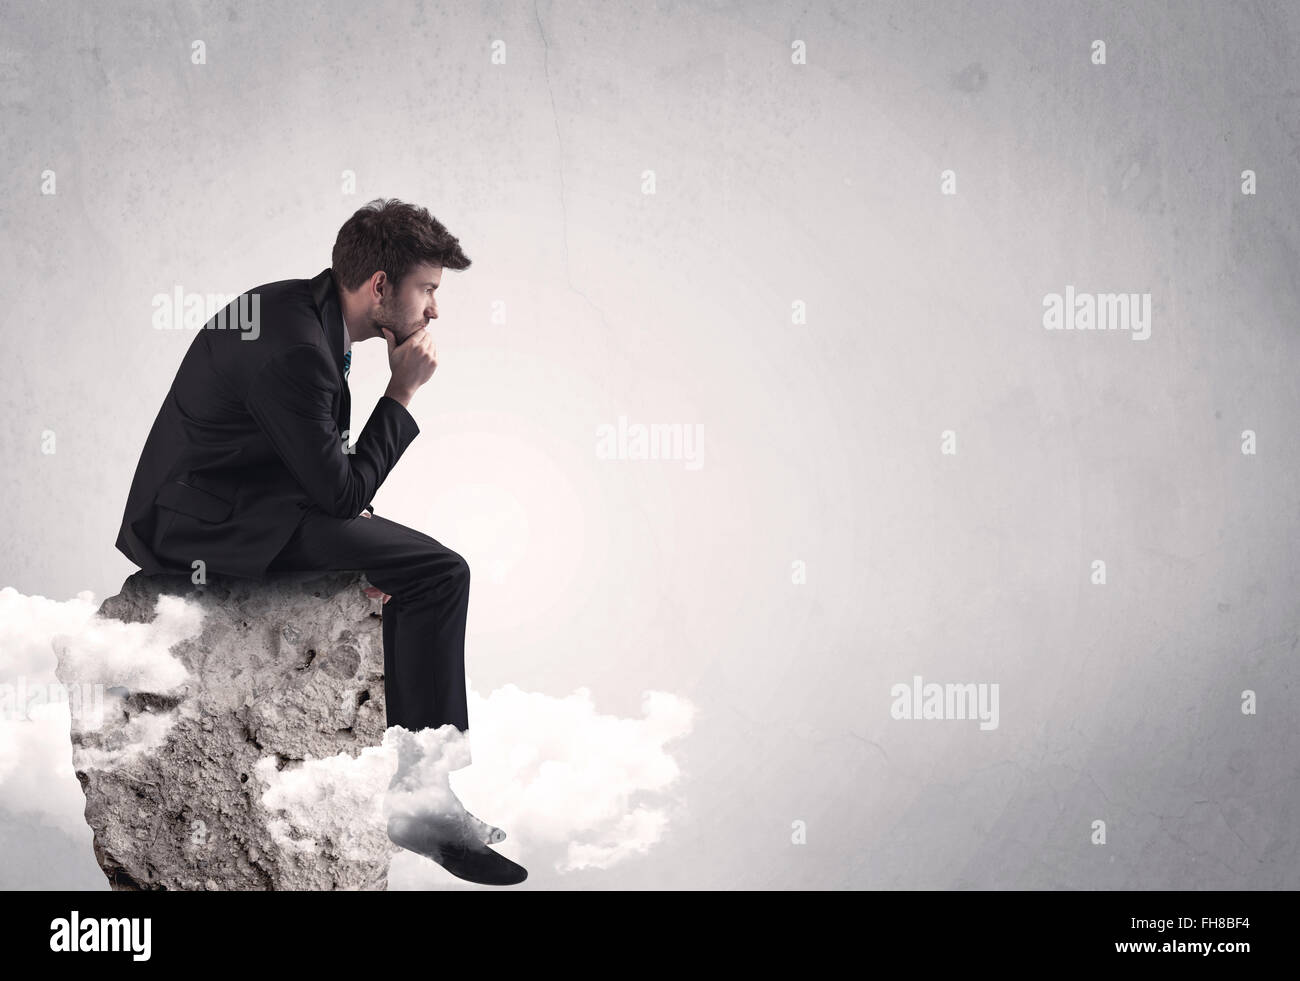 Office worker sitting on top of a rock Stock Photo